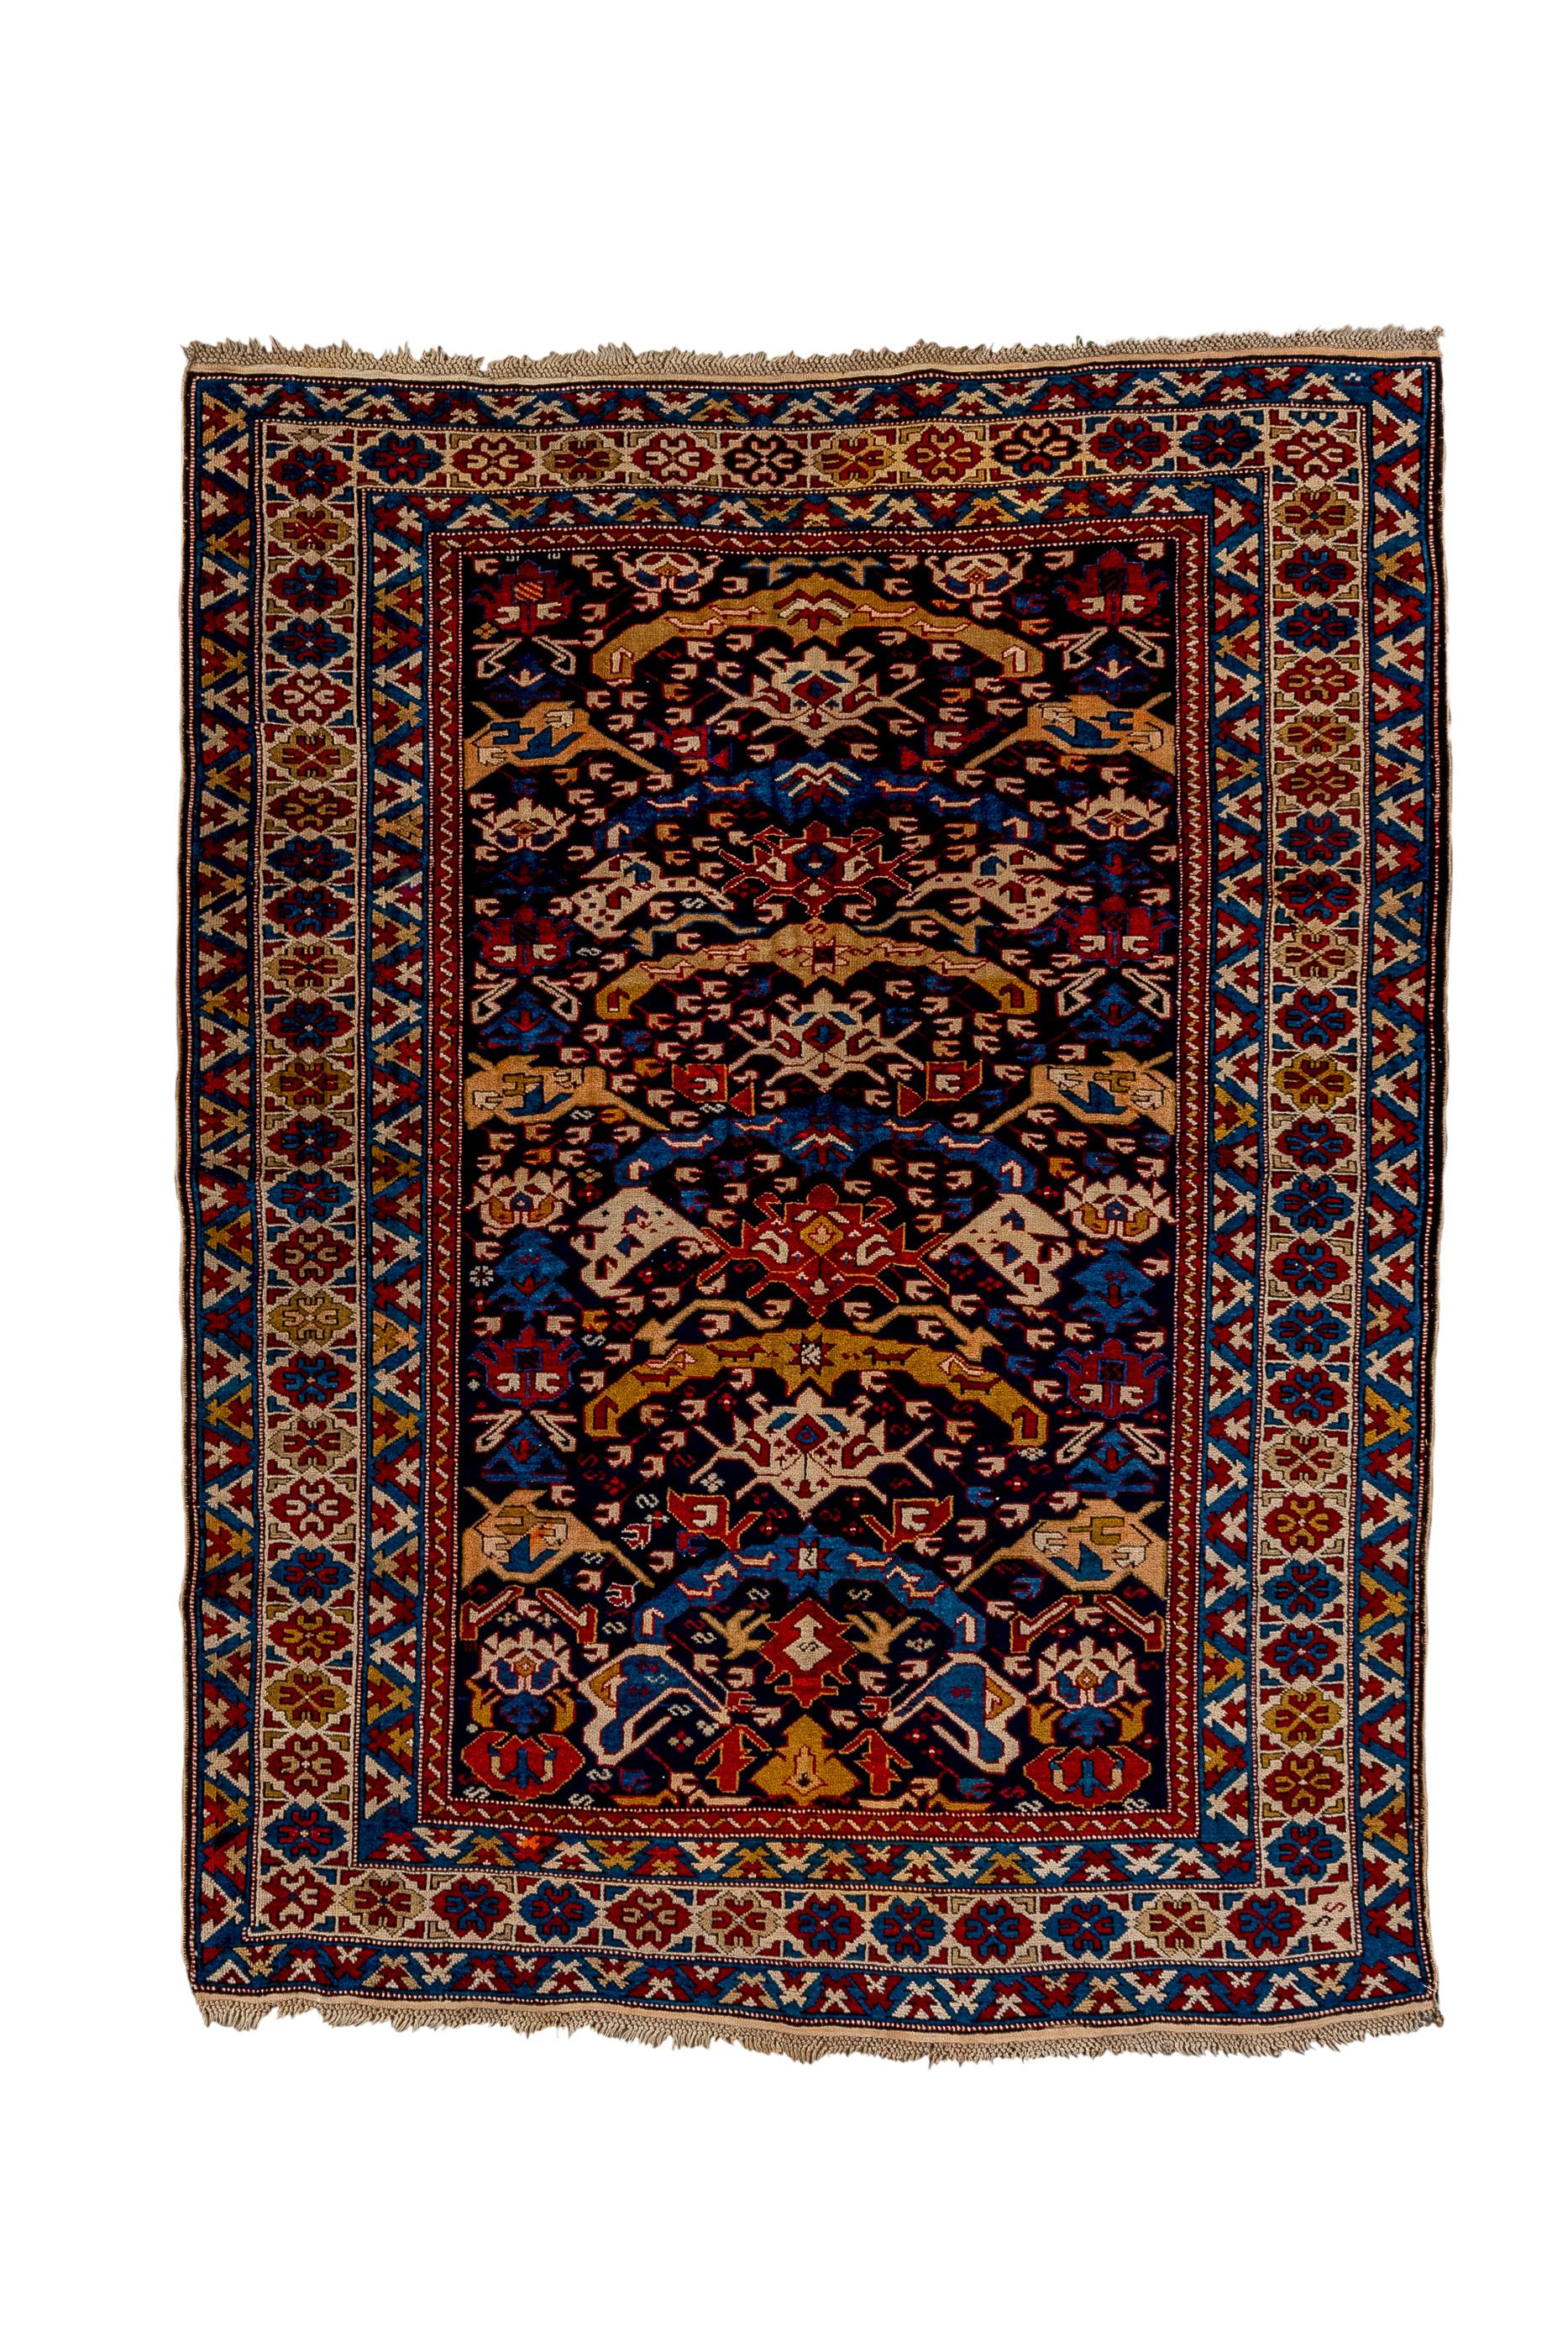 This west Caspian Bidjov village scatter from the Shirvan/Kuba area shows an ascending, one way design of stylized arching elements, abstract palmettes and a multitude of small C’s in shades of red, blue and camel/straw, in relief on the corroded